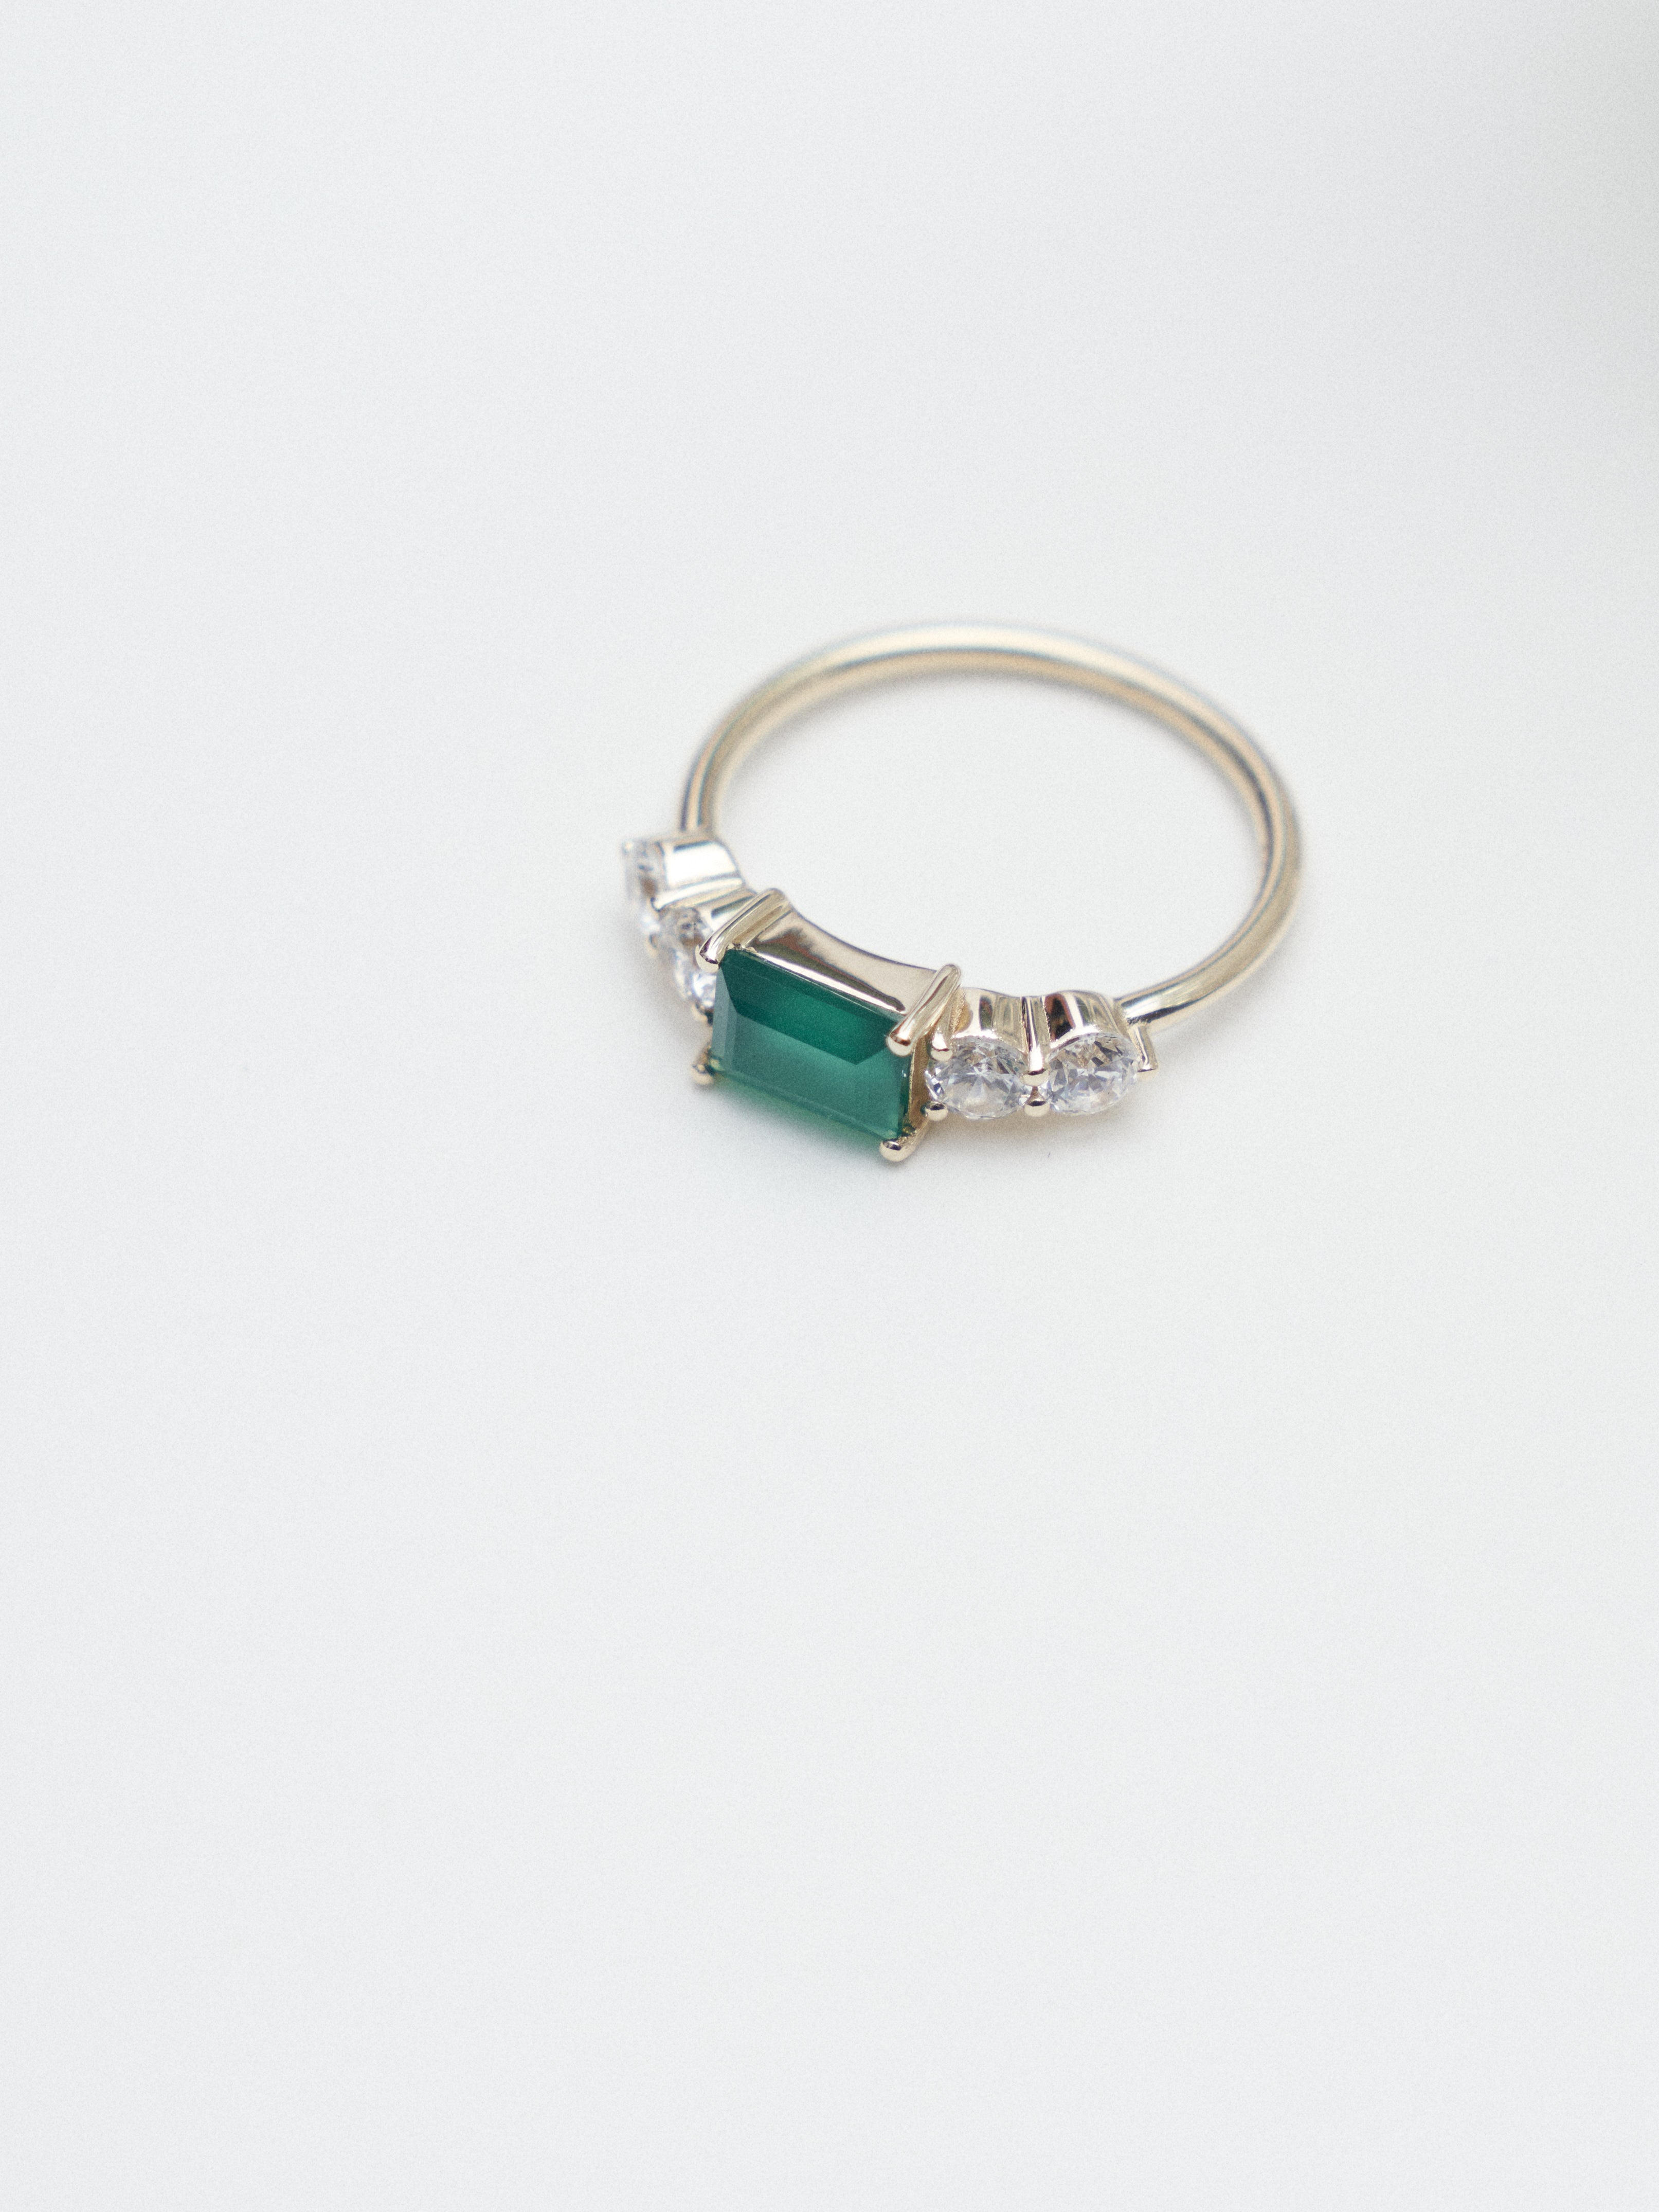 Green Onyx and moissanite ring.